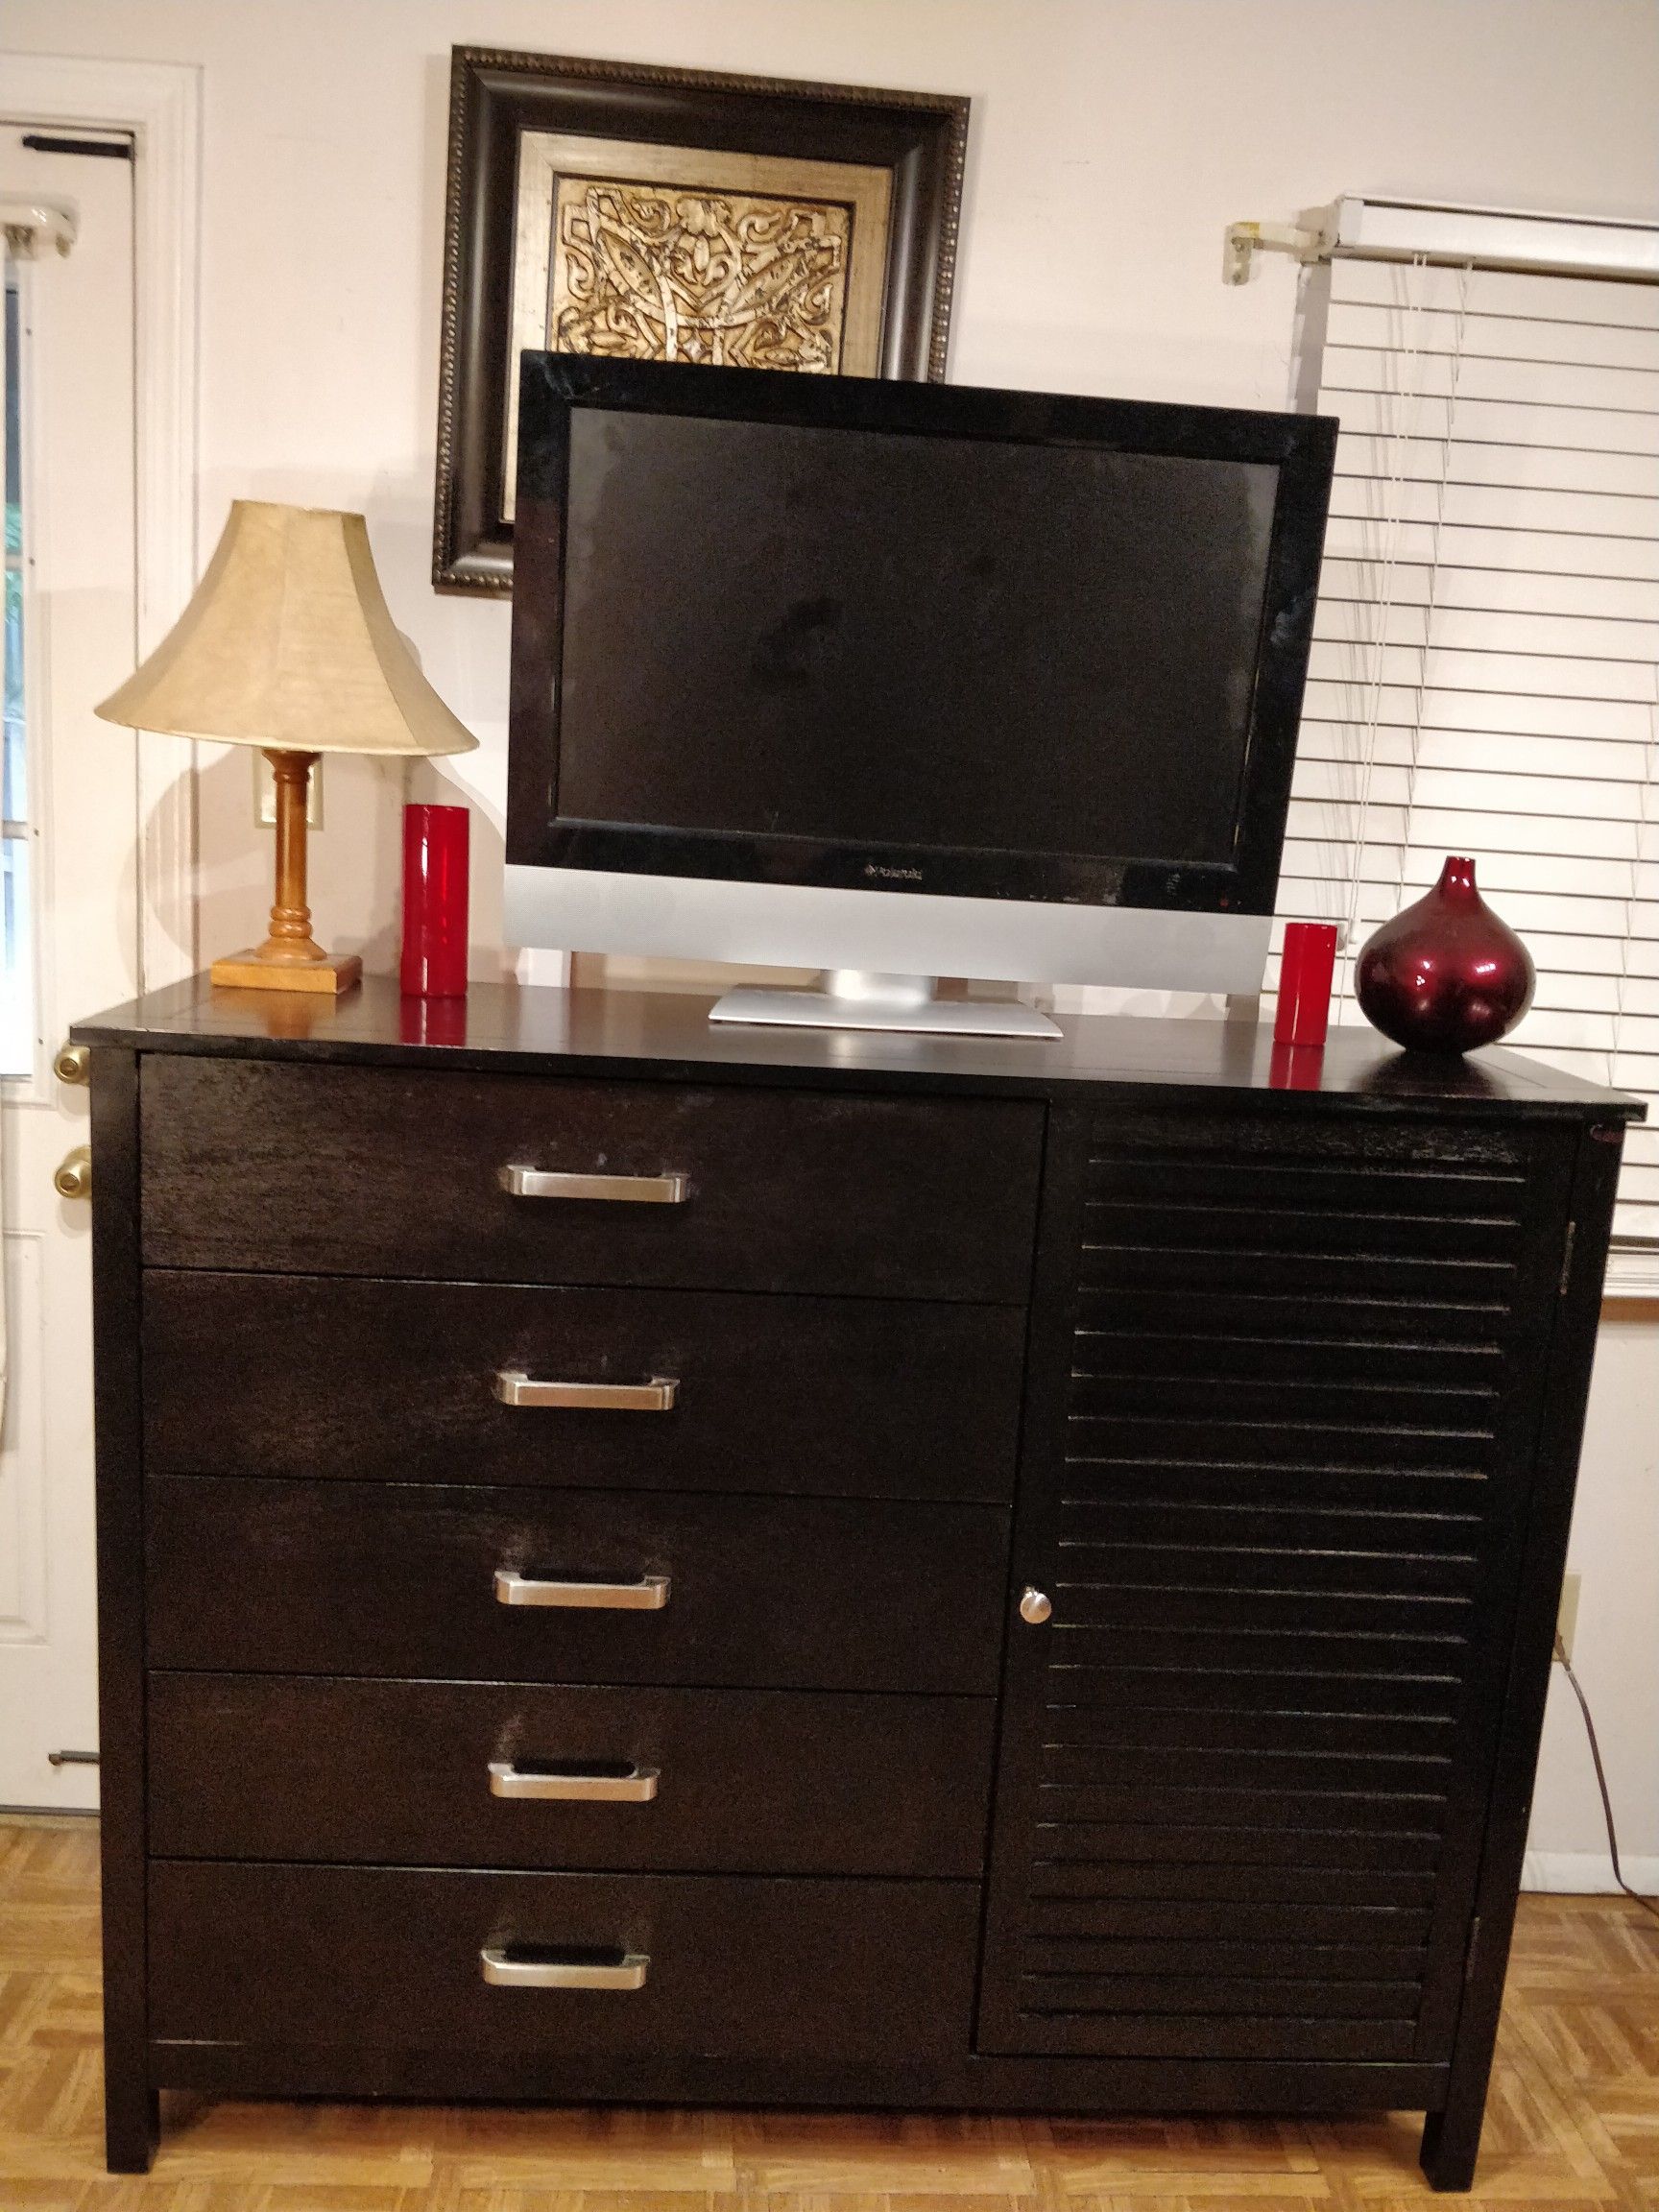 Like new modern wooden dresser/TV stand/buffet with big drawers and cabinet shelves in very good condition